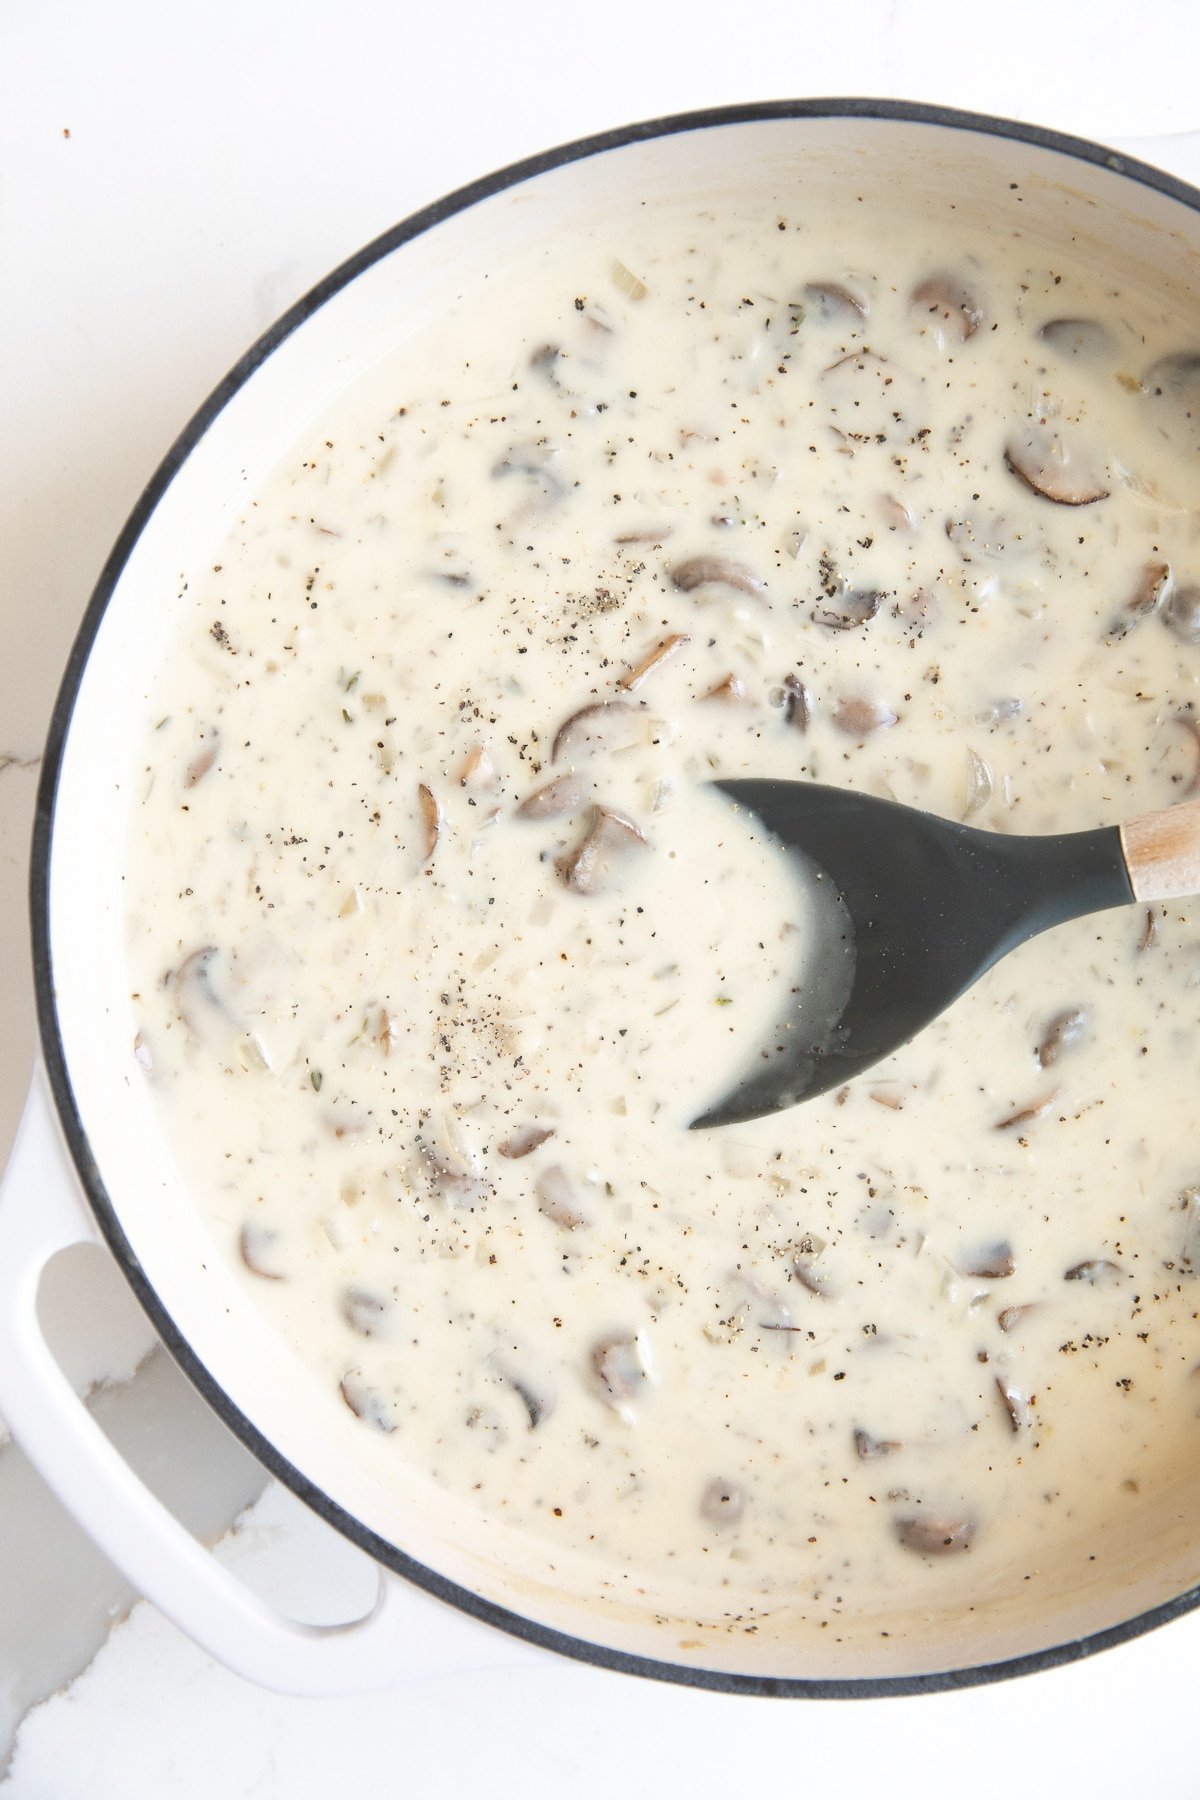 Large white saucepan filled with homemade mushroom soup sauce.